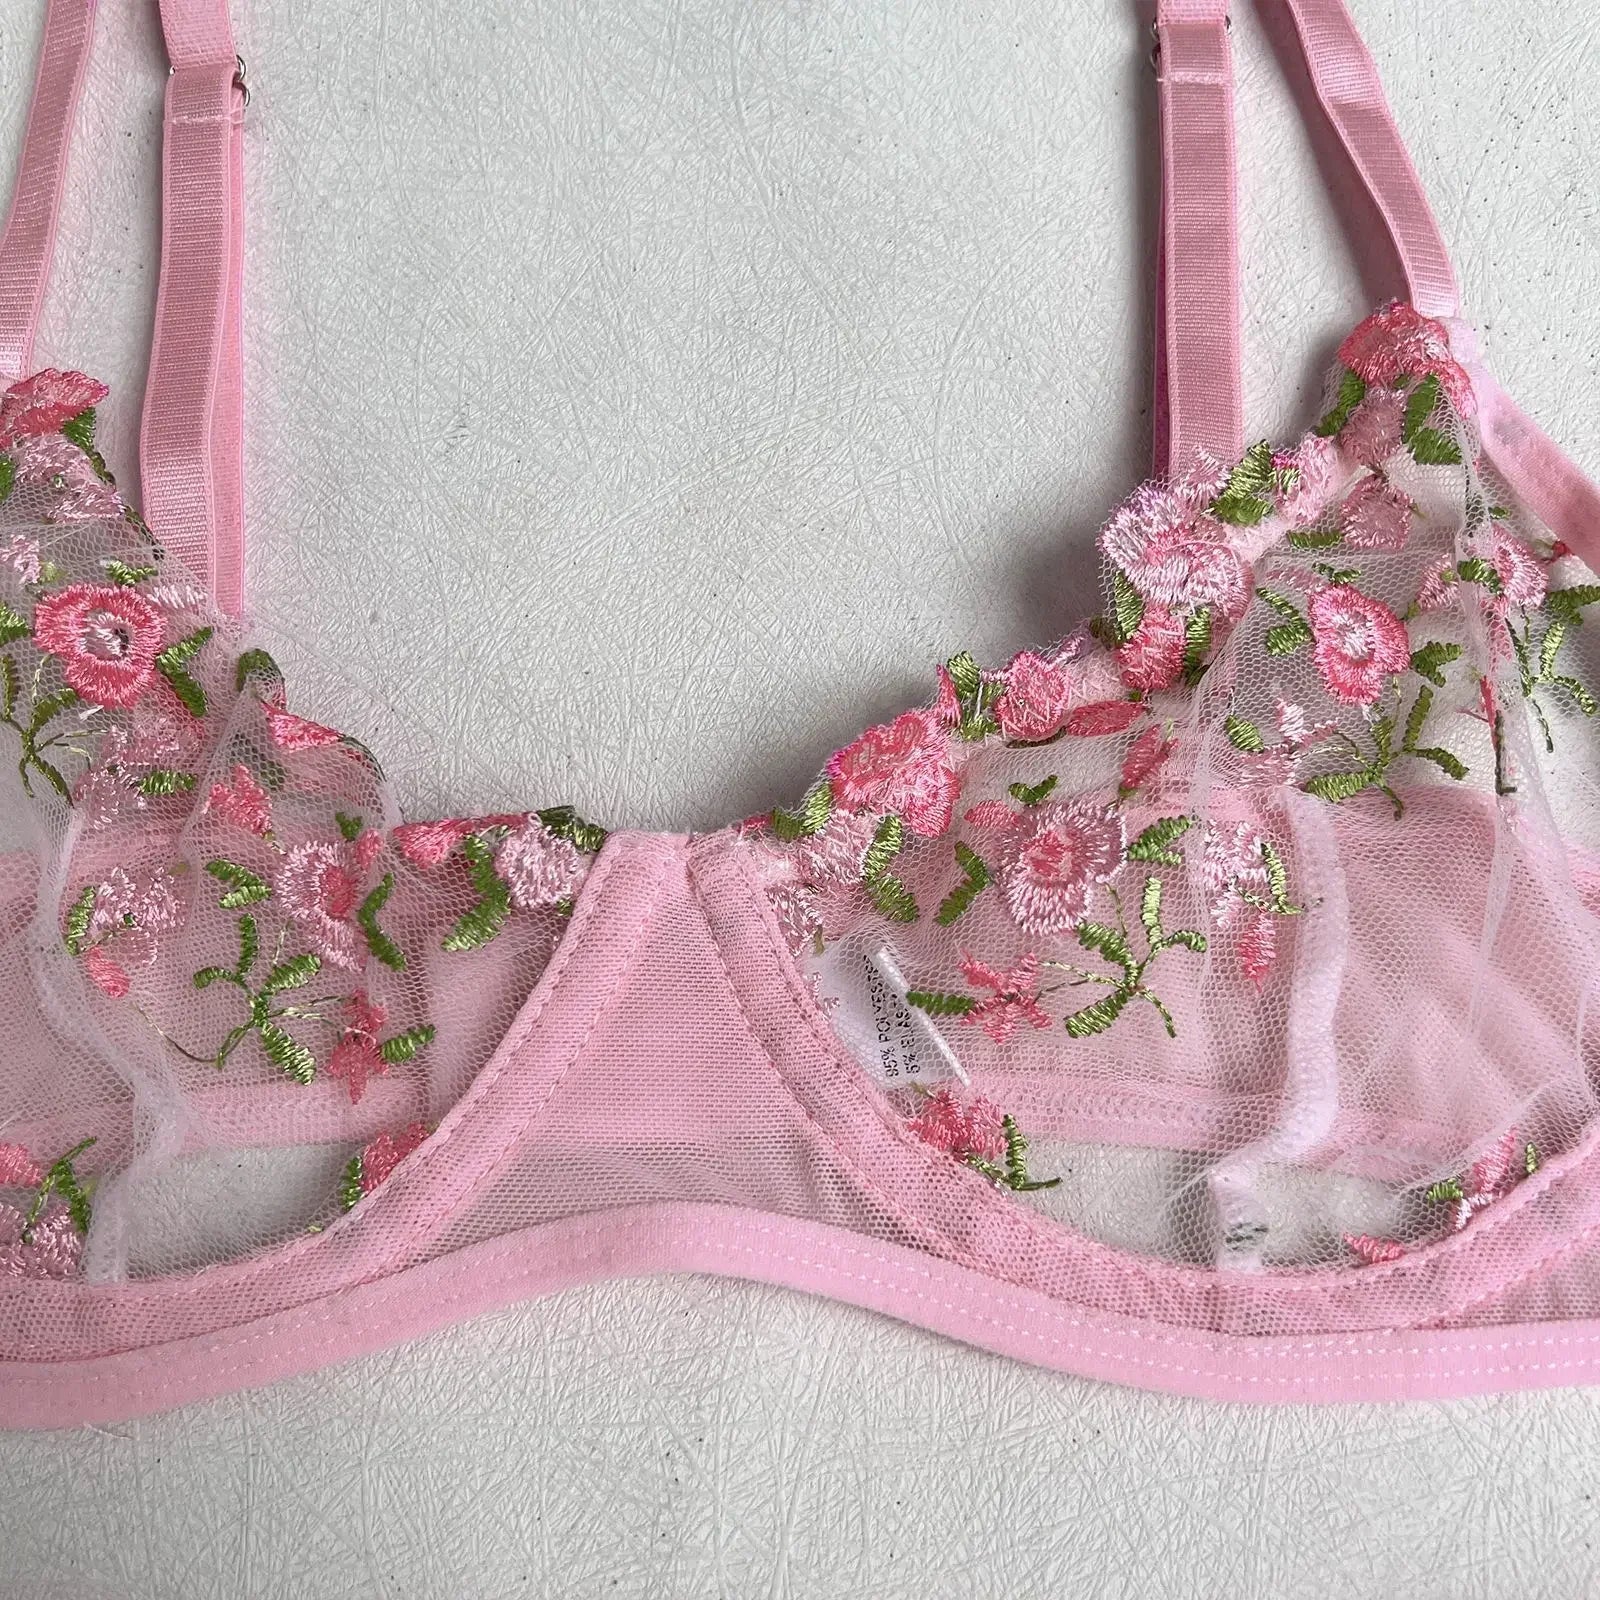 Exquisite Flower Embroidery Bra and panty set